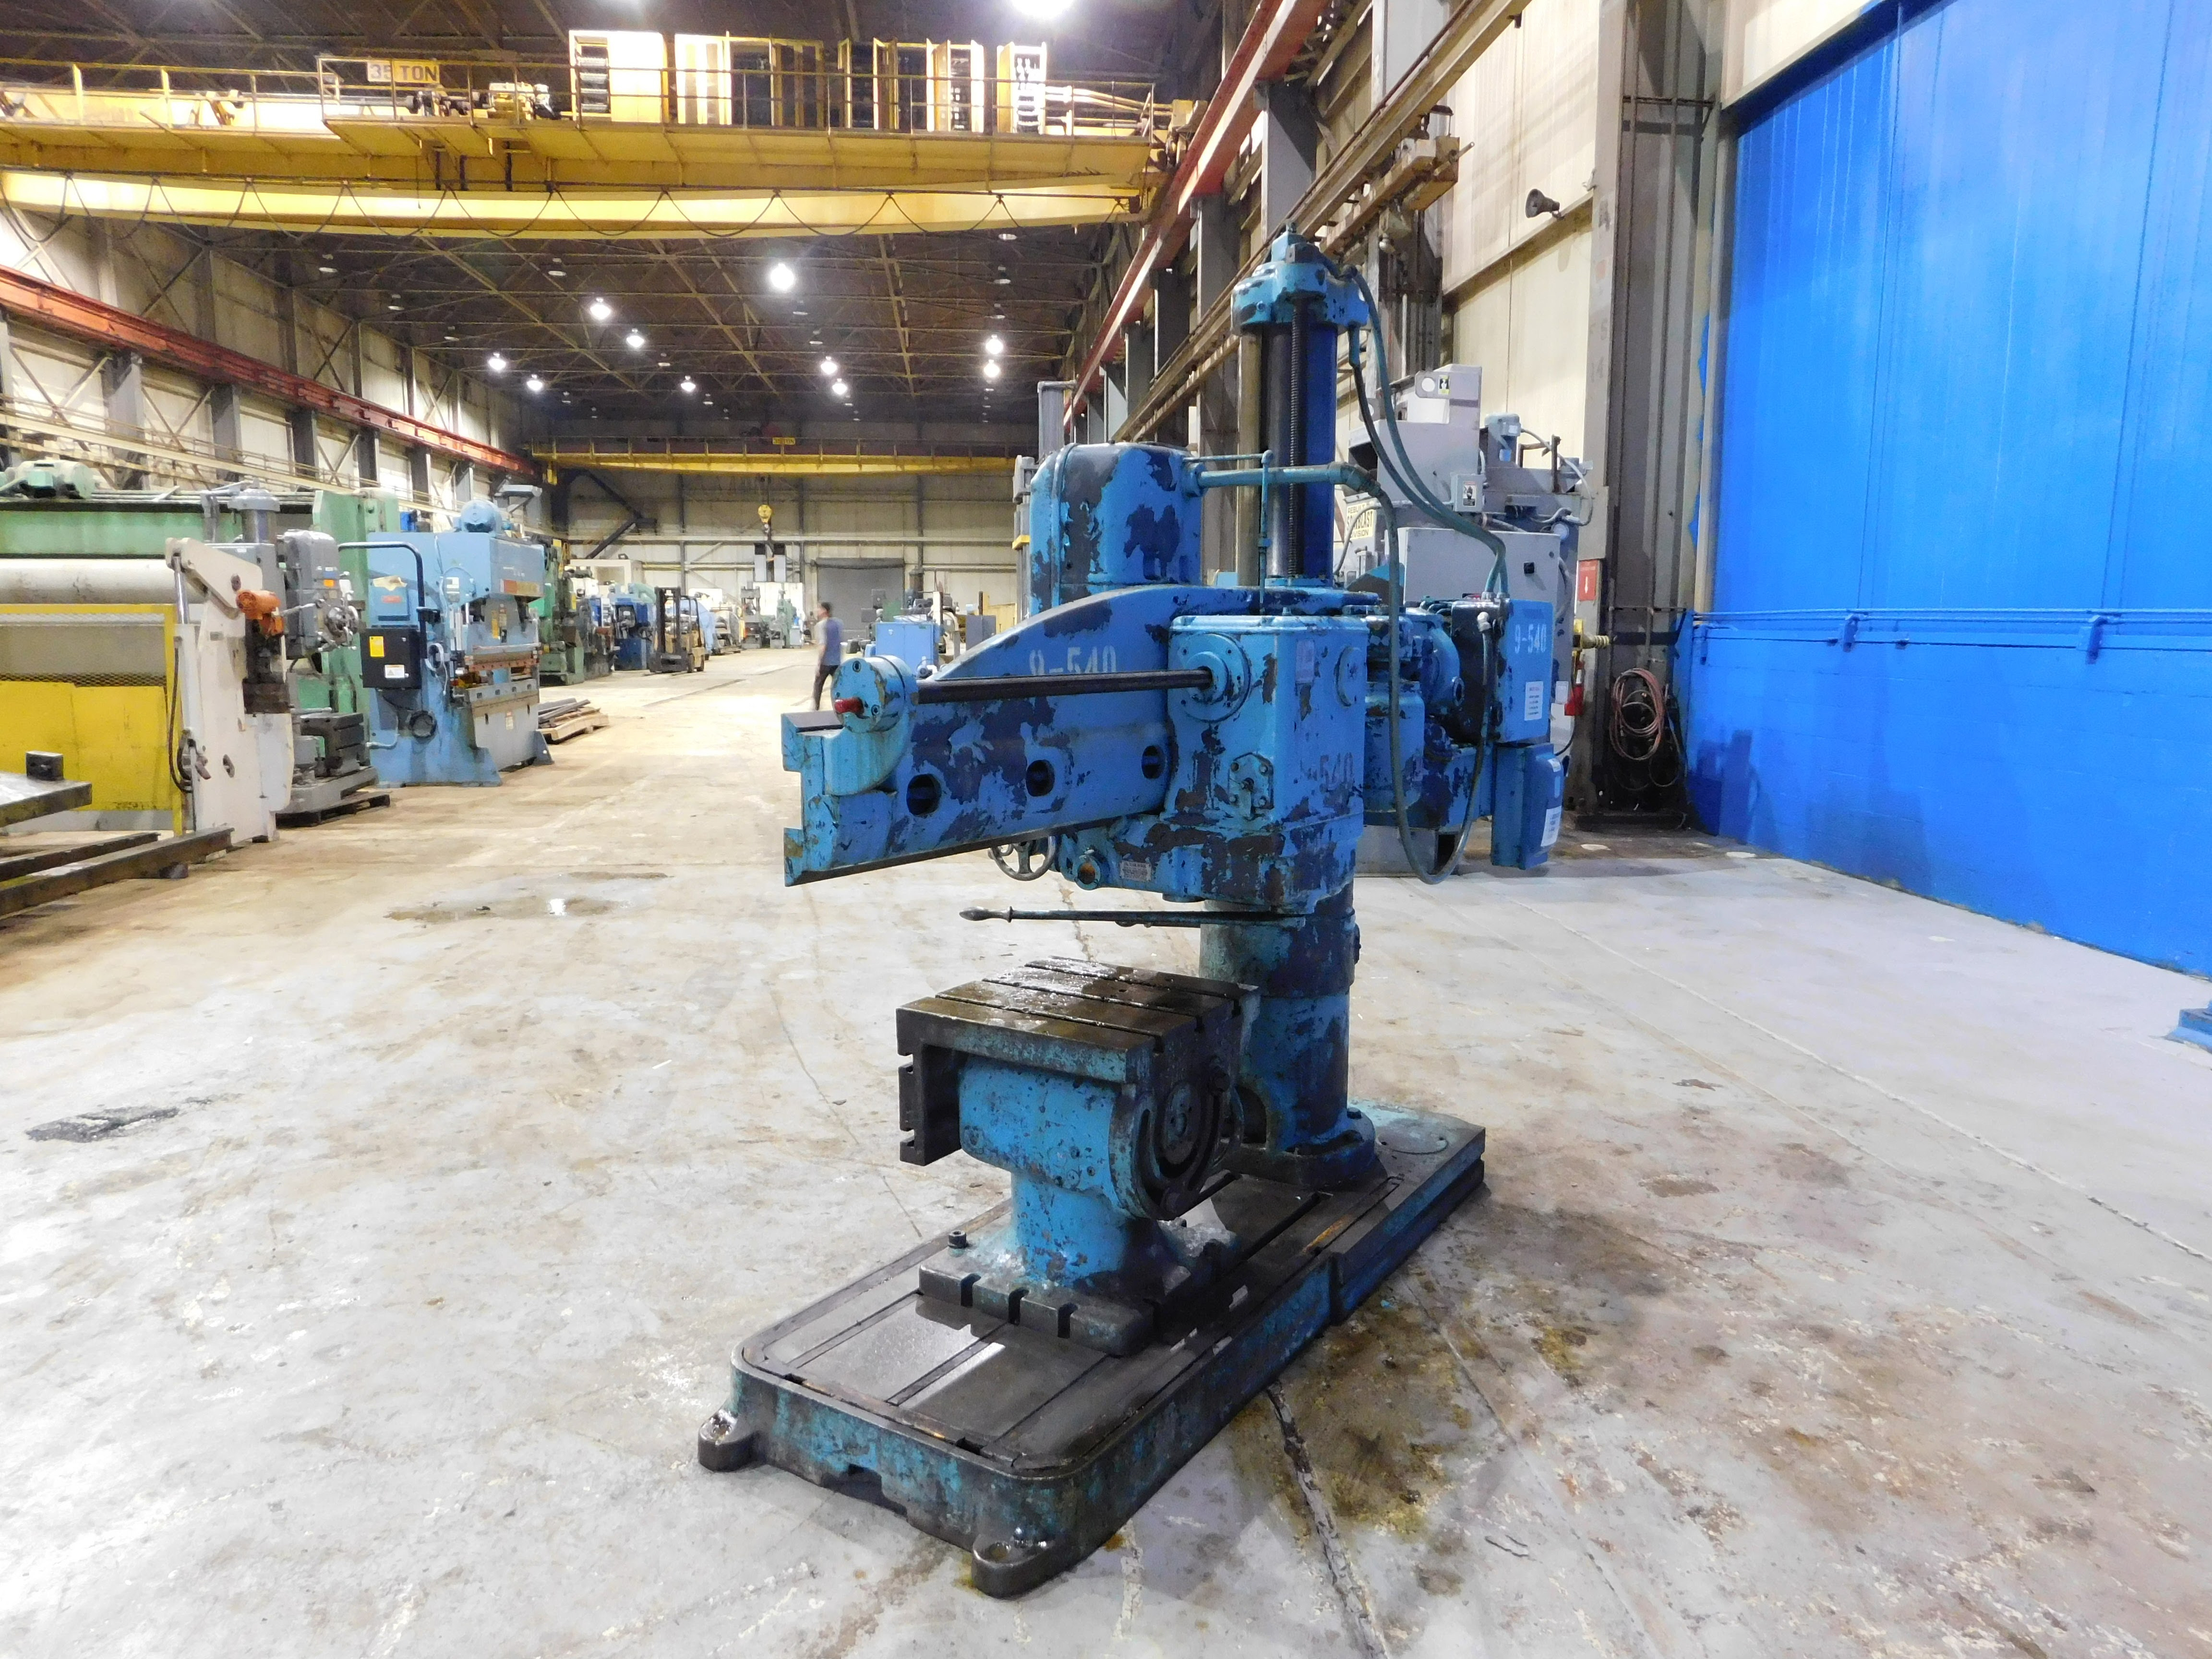 Used Drills Manual And CNC For Sale - Carlton - Radial Arm Drill | 4 X 9"